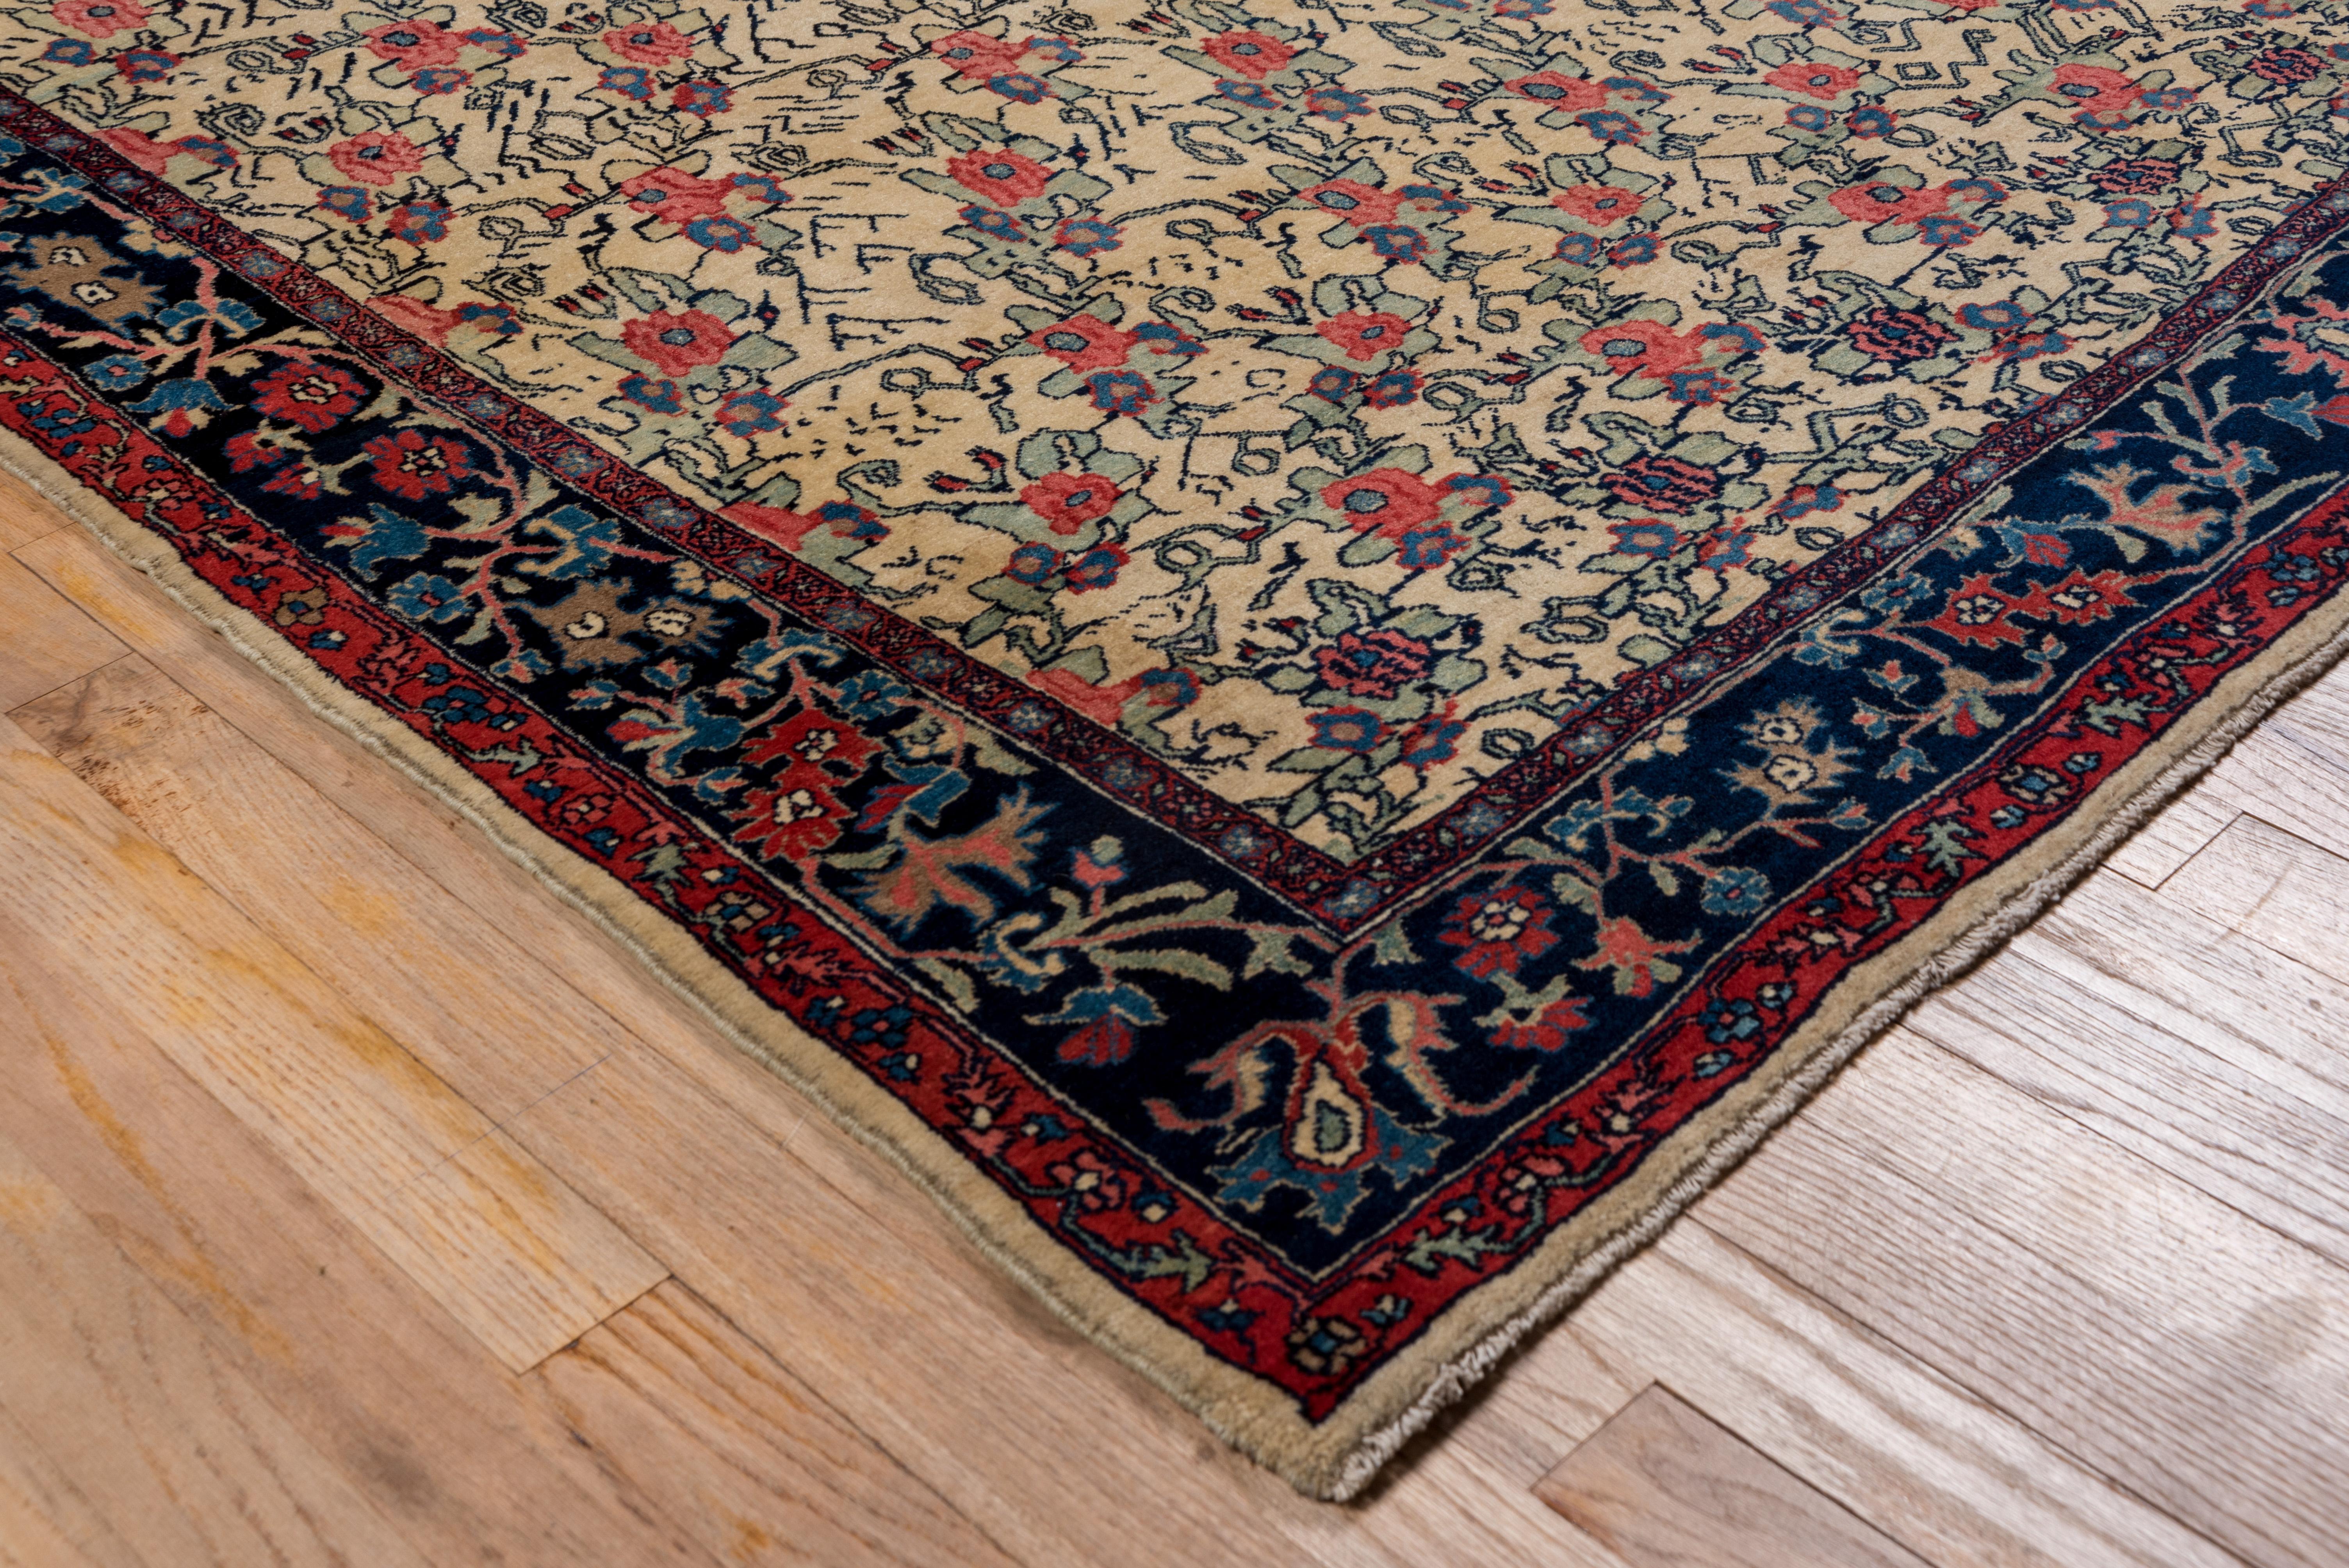 This very solidly woven Kurdistan urban scatter displays an ivory ground with stylized rose bunches that progressively move apart and geometries as one moves up the rug. The navy border displays bud, small flowers and branching vines. Great